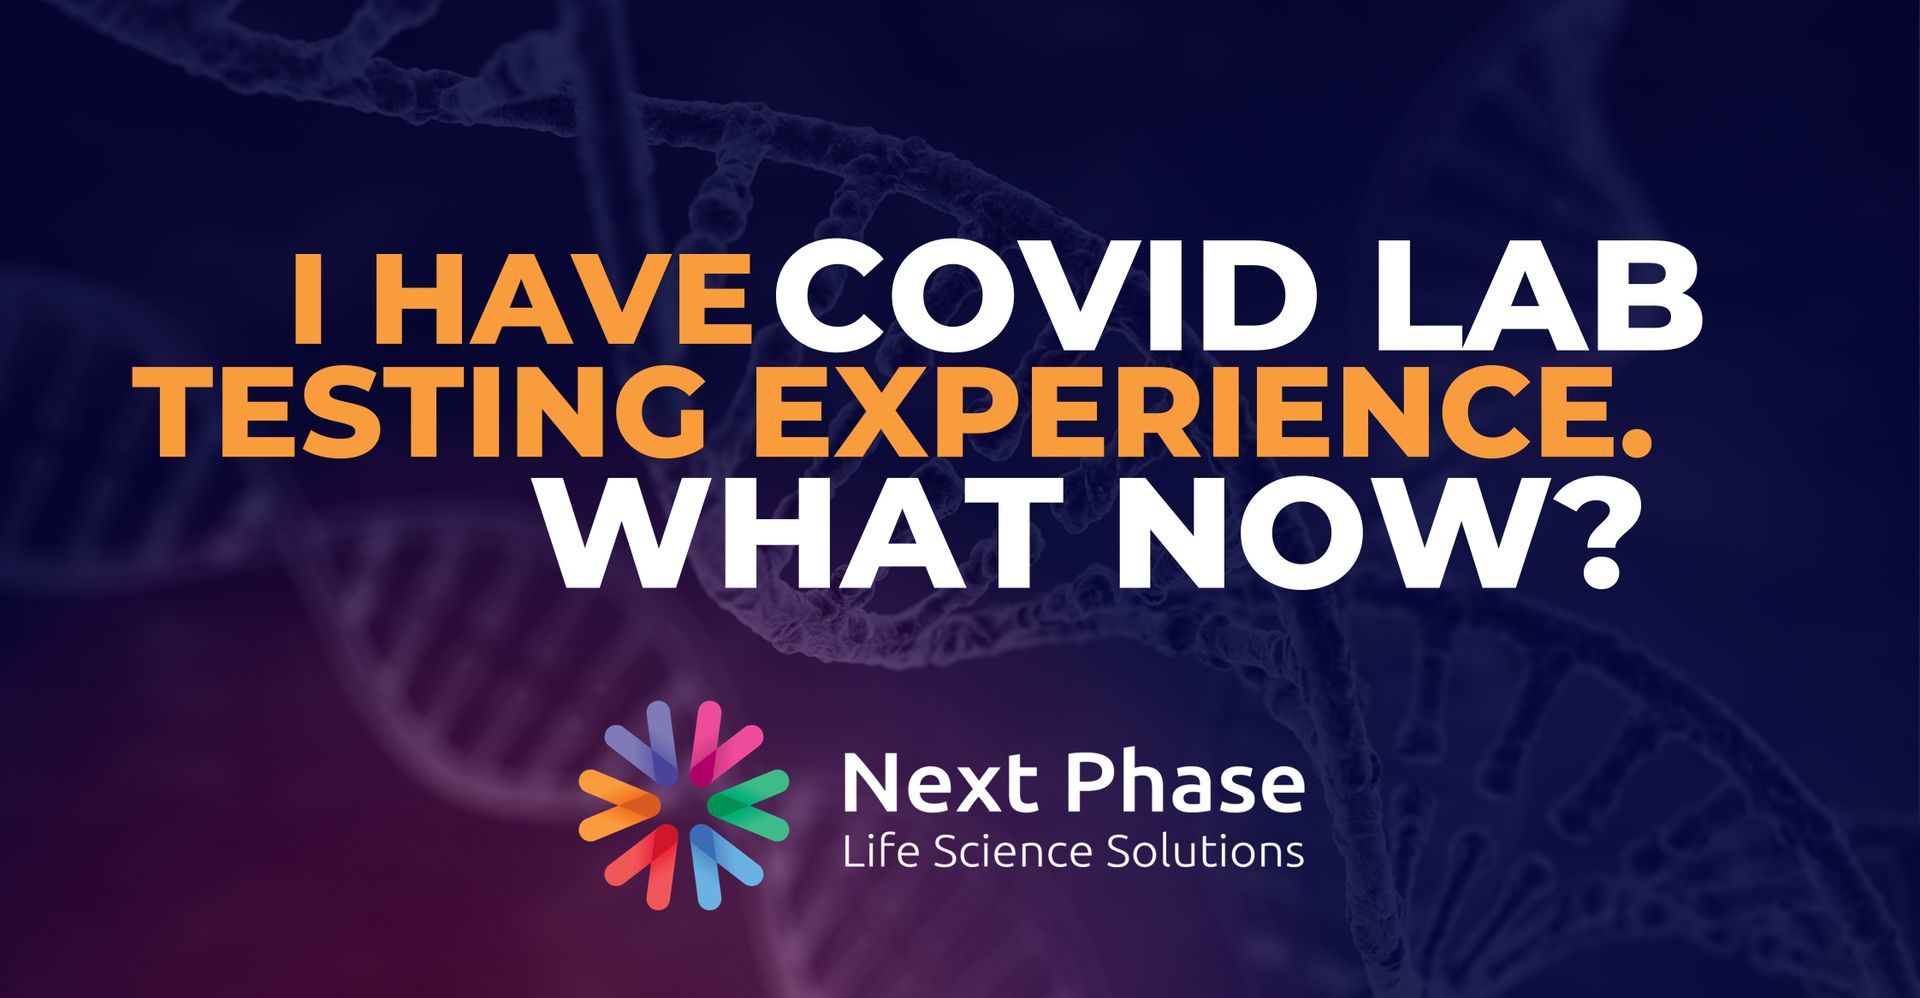 Next Phase - “I have experience in a Covid testing lab. Where can I go from here?”